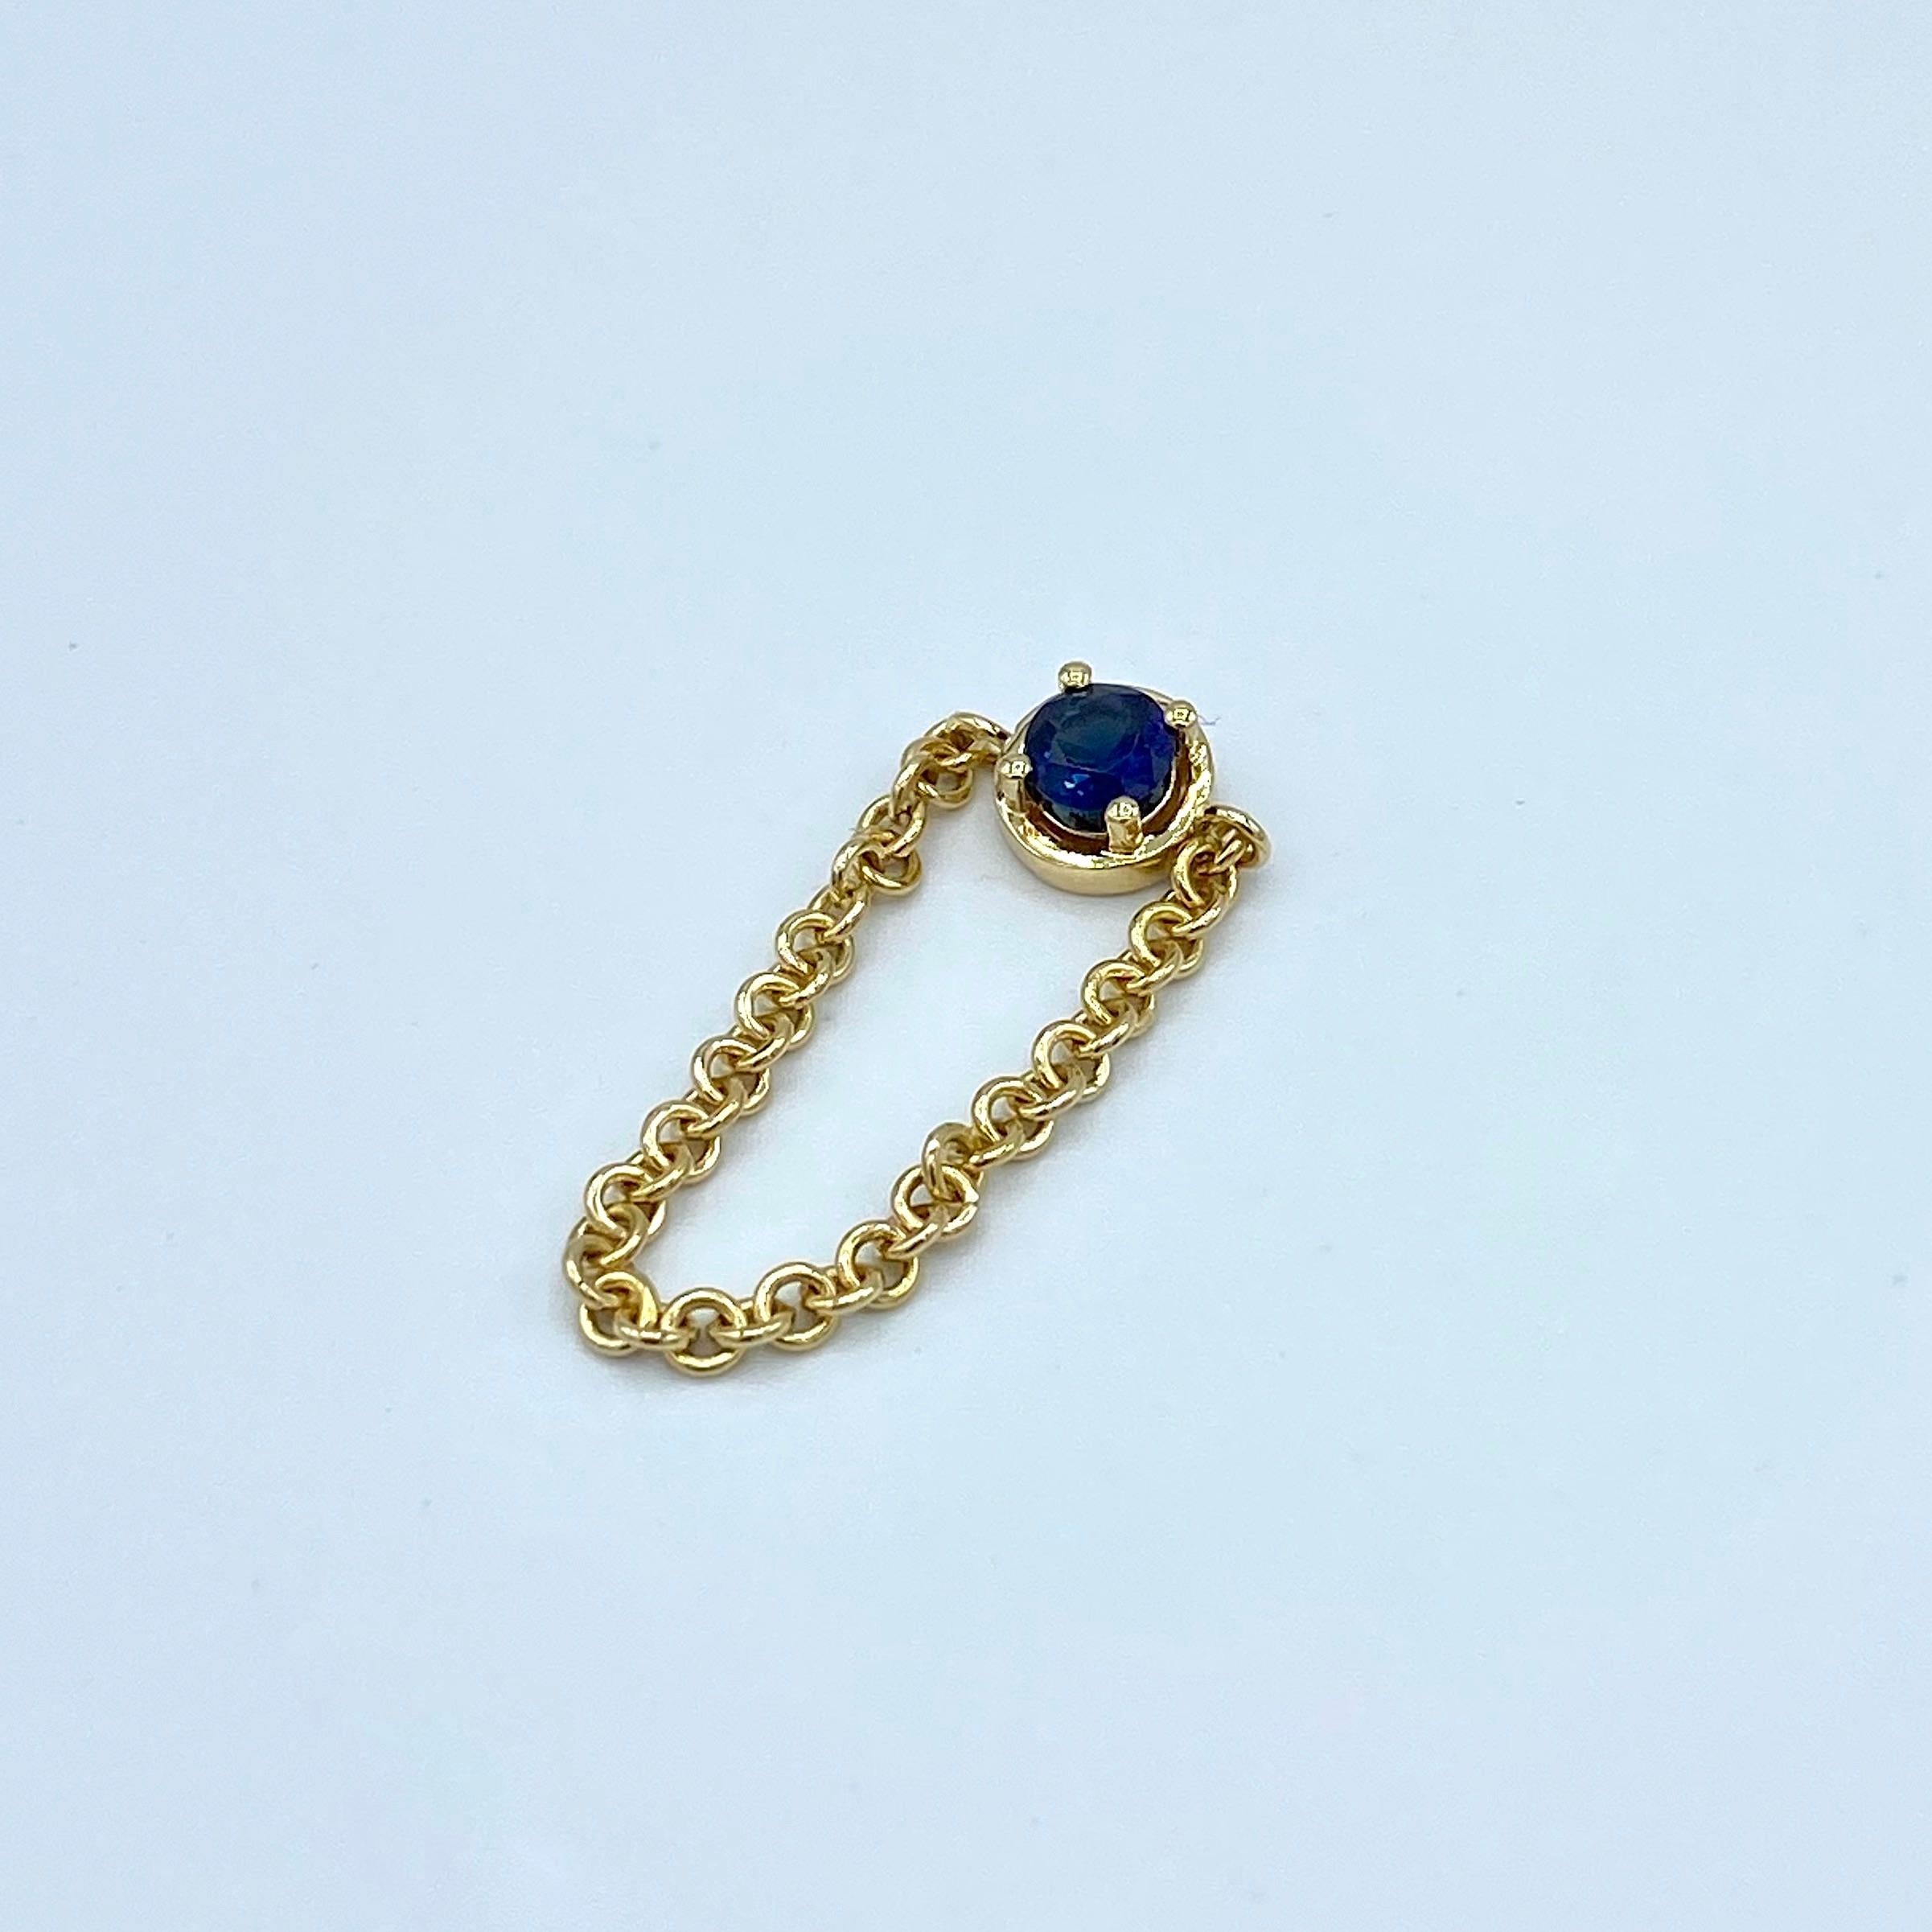 This ring is one of the first pieces of the new color line.
The completely handmade shank is an 18kt yellow gold chain, which attaches to the central griff with a 4mm blue sapphire set.
It can be worn together with other identical rings with